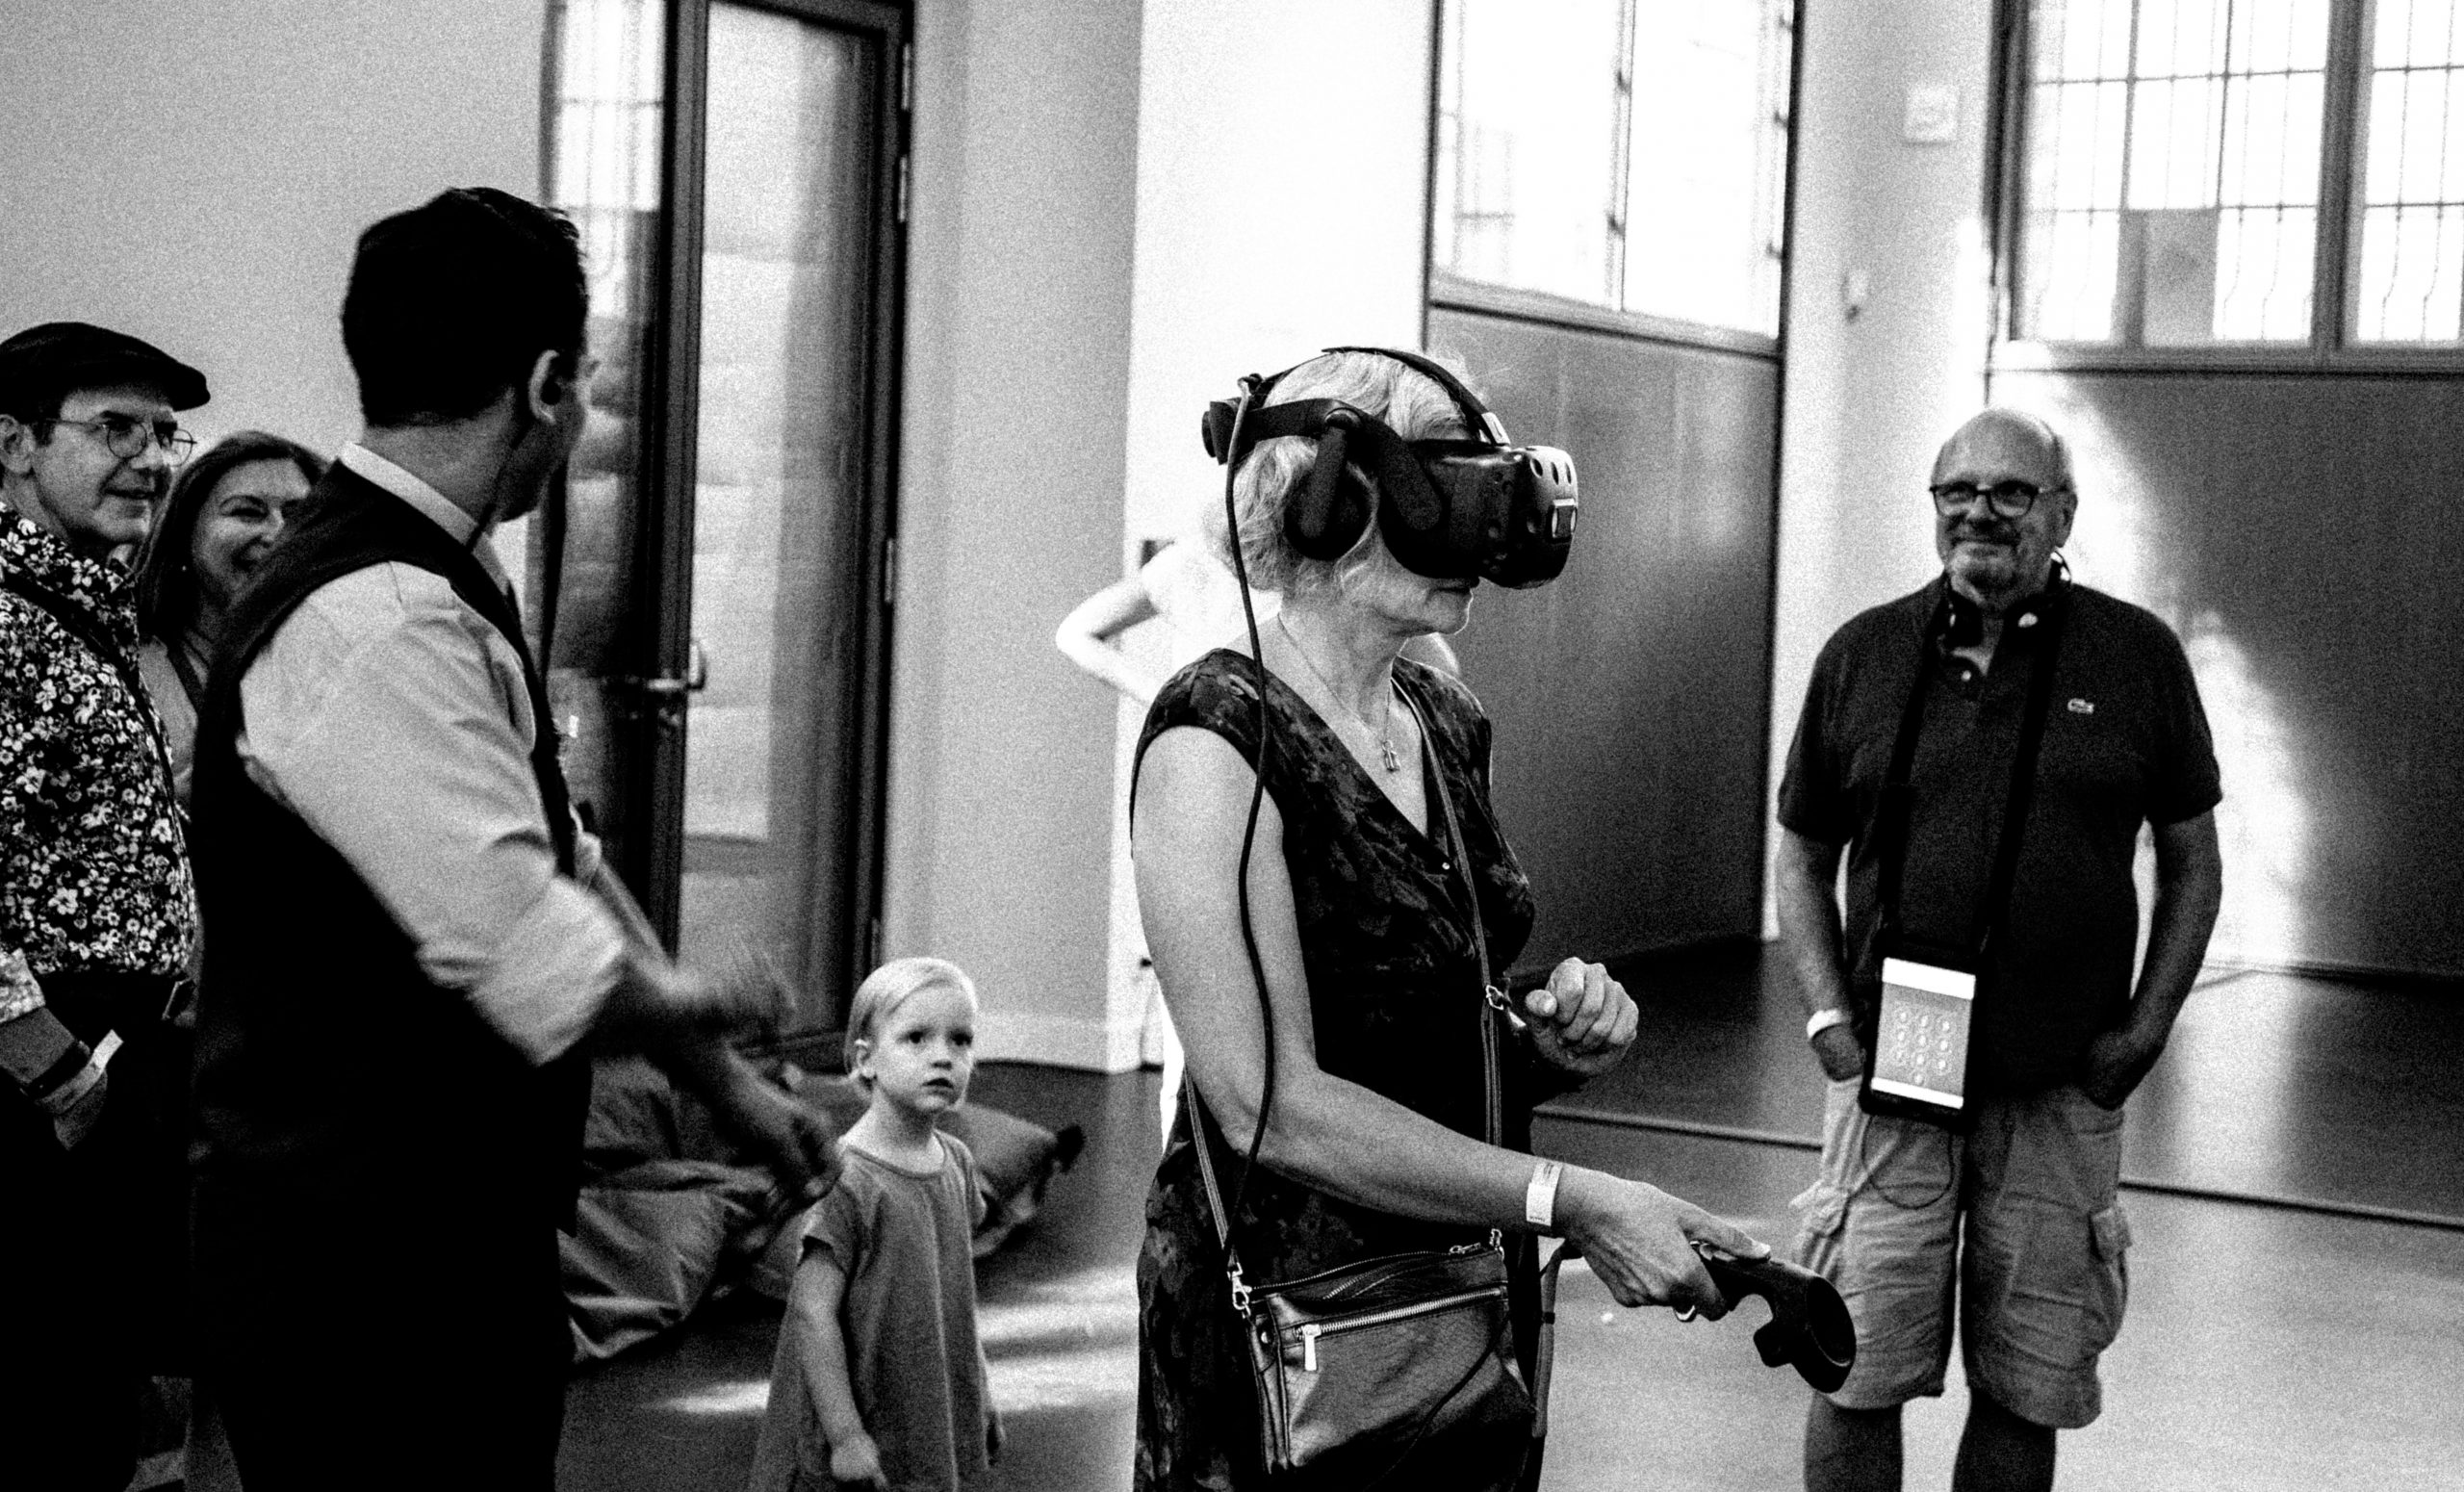 A black and white image of a woman standing in a VR headset. There are several men around her watching her